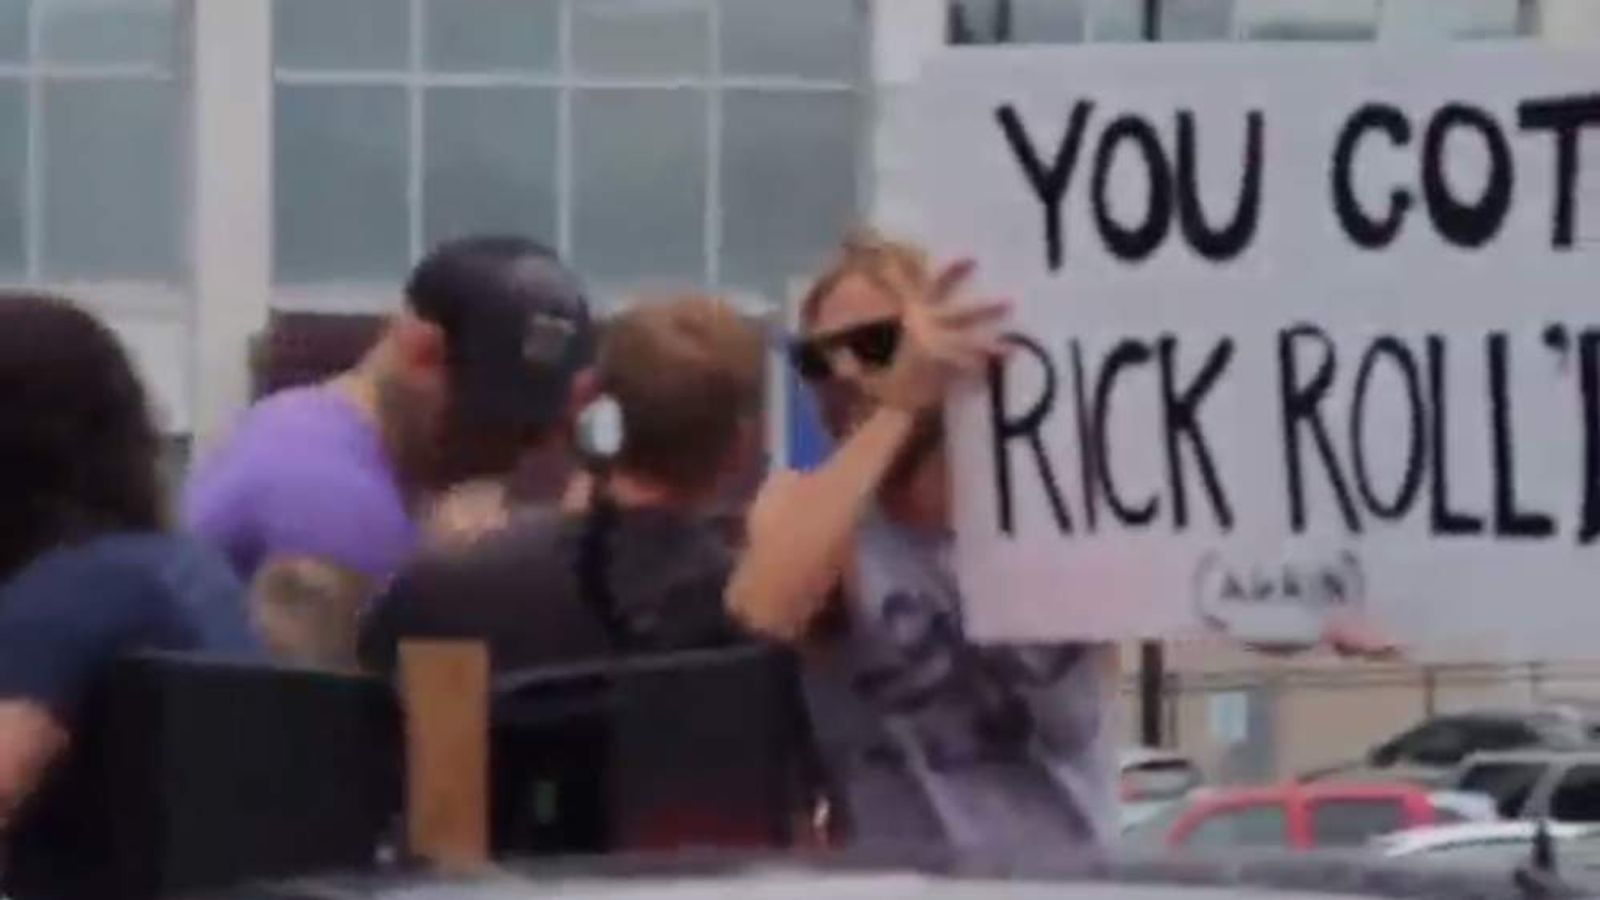 Dave Grohl Explains Why the Foo Fighters Rickrolled the Westboro